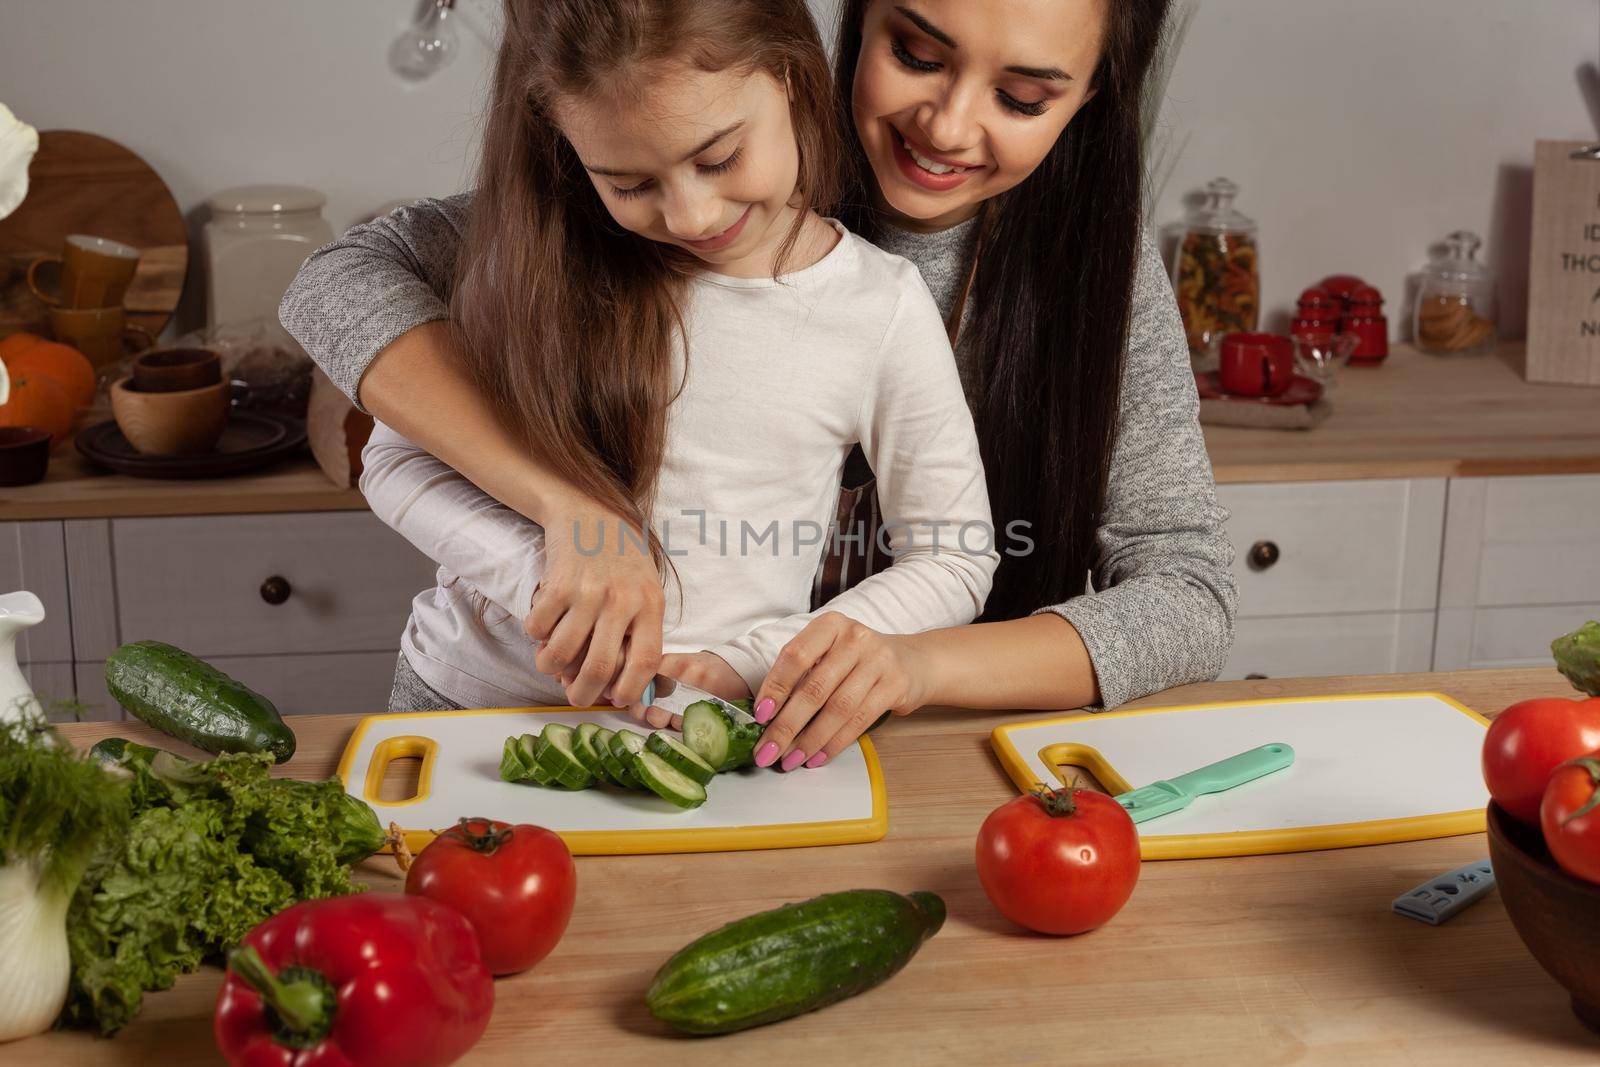 Happy loving family are cooking together. Elegant mother and her daughter are making a vegetable salad and cutting a cucumber at the kitchen, against a white wall with shelves and bulbs on it. Homemade food and little helper.